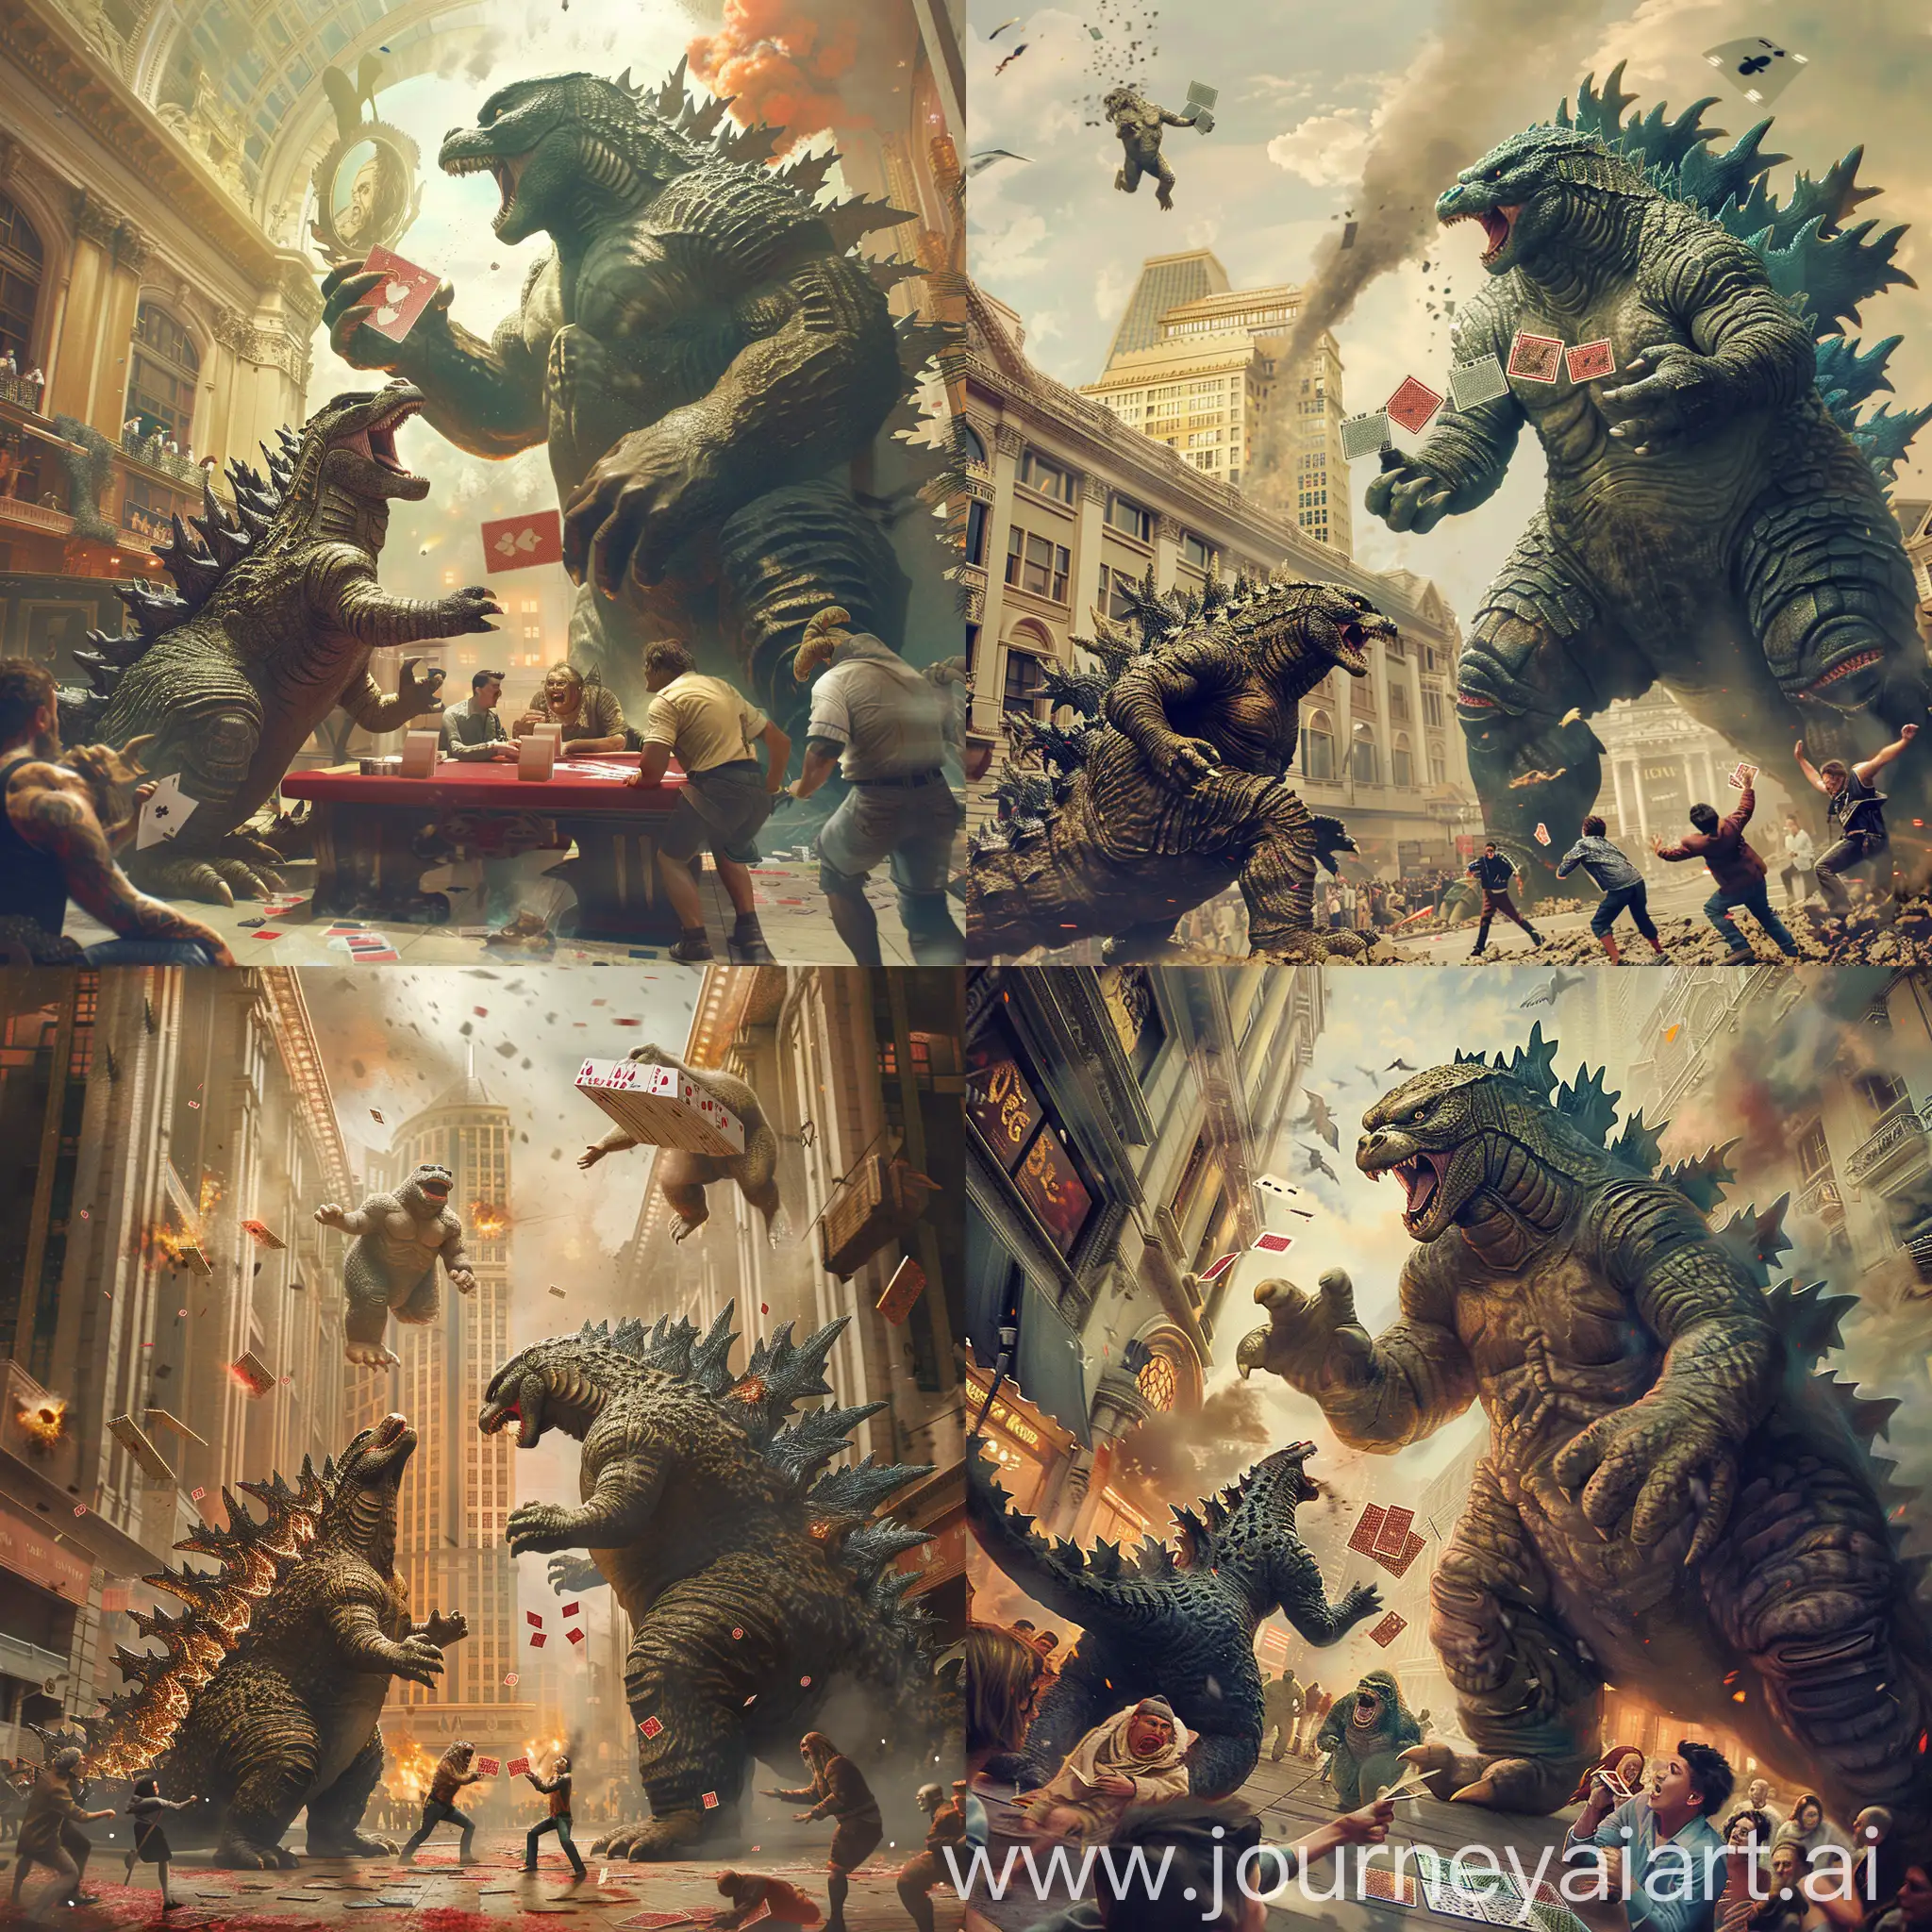 Massive-Godzilla-and-King-Kong-Engage-in-BuildingSized-Card-Game-Amidst-Fleeing-Crowds